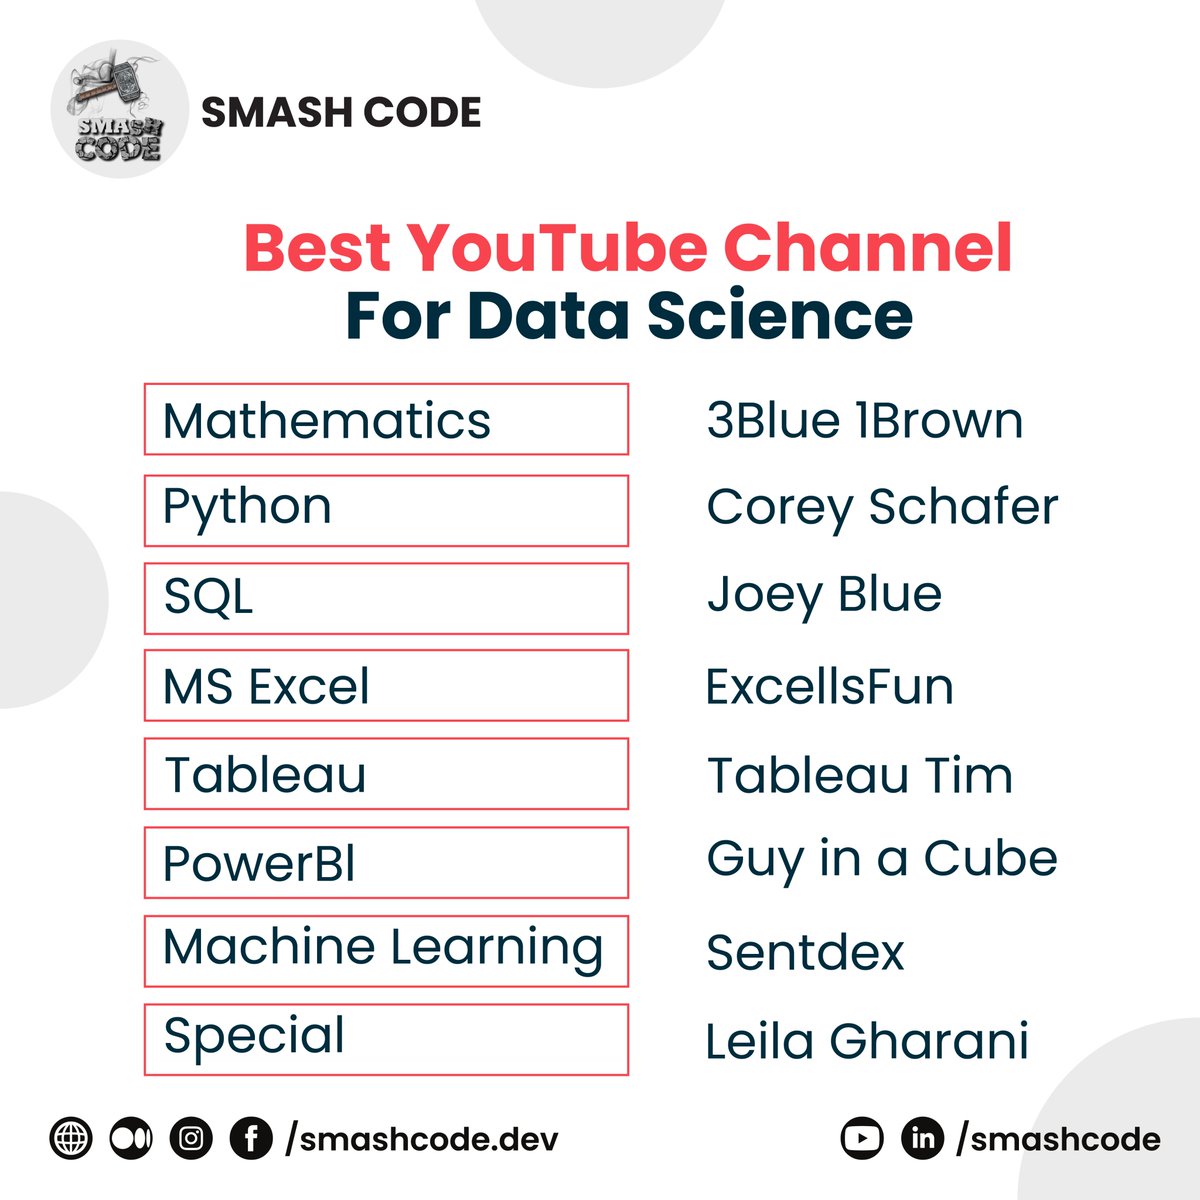 ' BEST YOUTUBE CHANNEL FOR DATA SCIENCE '
Web link in the first comment...
#smashcode #smashcodedev #letsconnect #python #sql #machinelearning #onlineearningskill16 #onlineearningmoney #freelancinglifestyle #WebDeveloper #WebDesign #webdesigning #onlineearningapp #webdesignagency